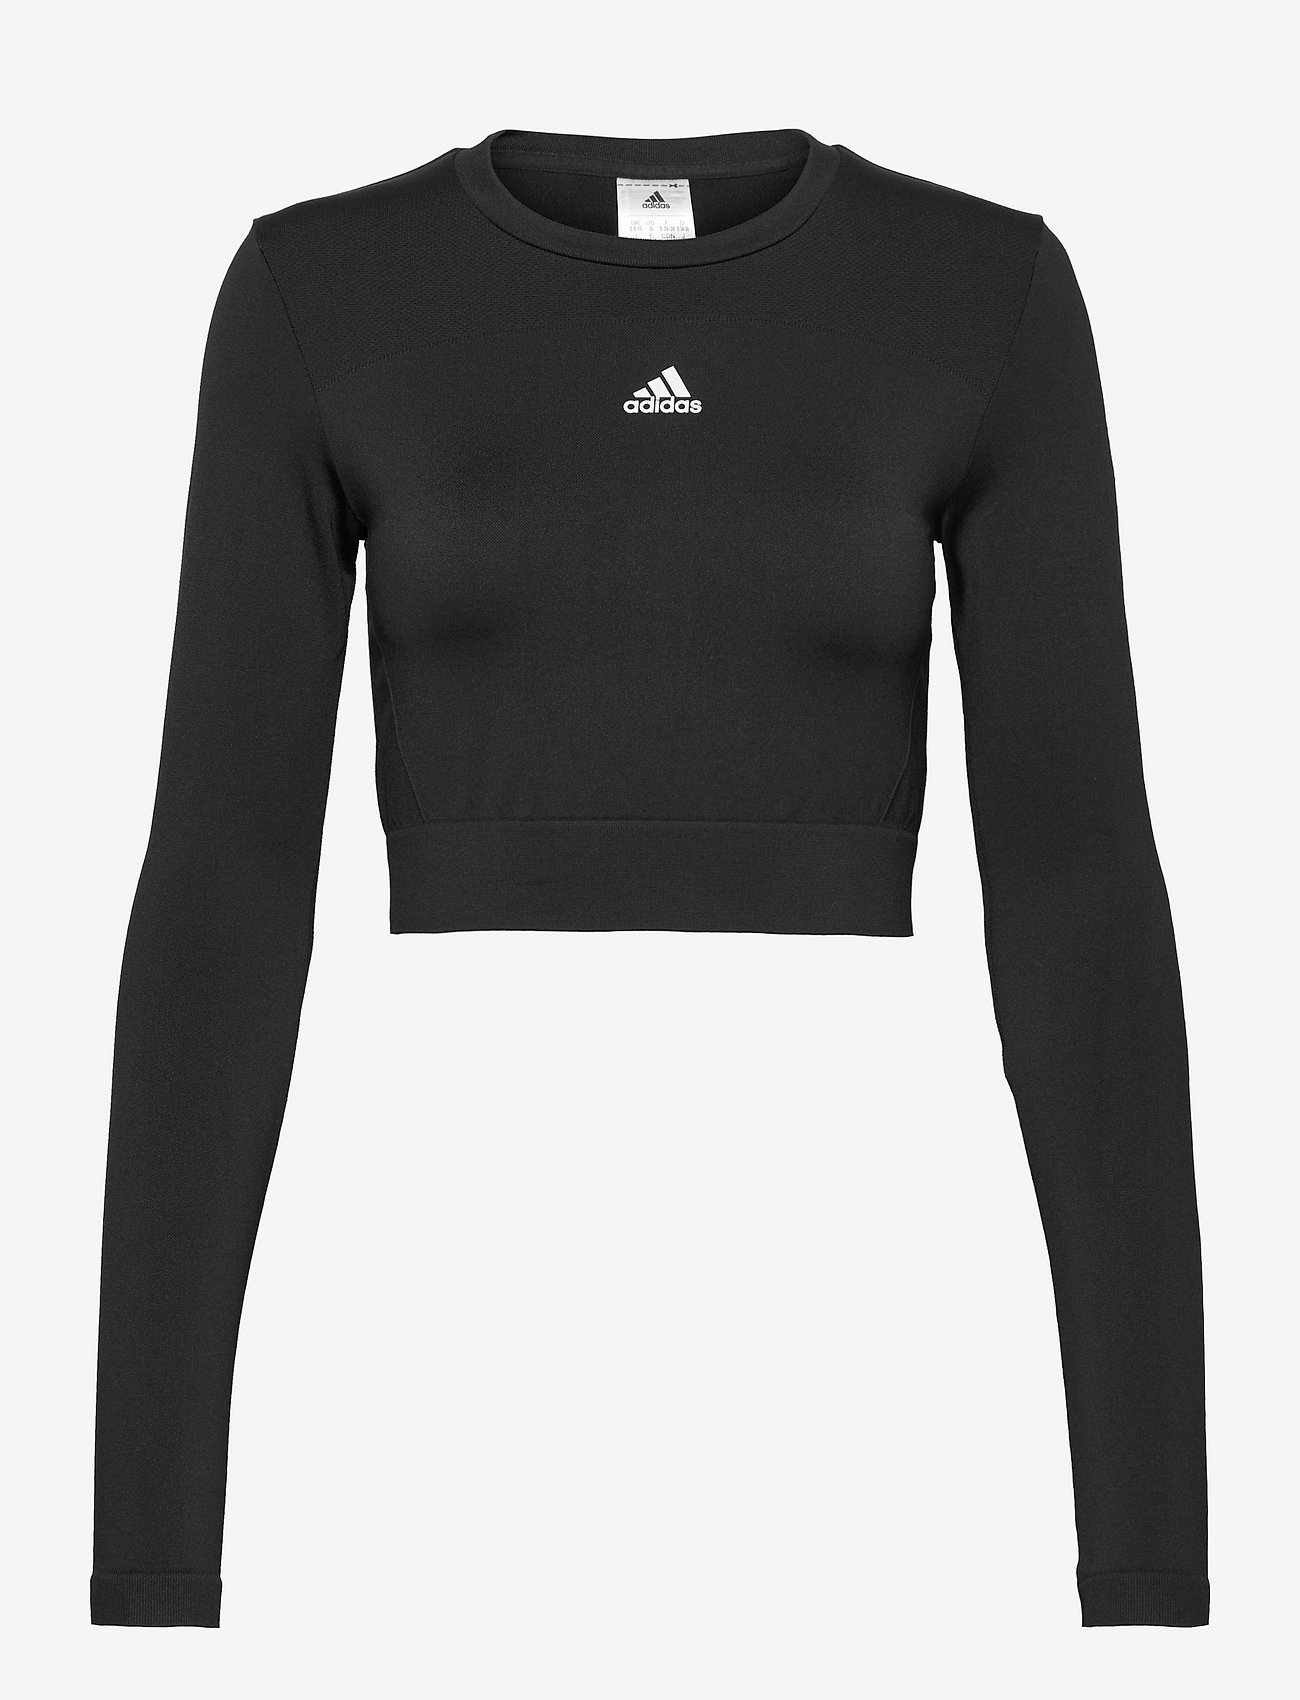 adidas Performance - adidas AEROKNIT Seamless Fitted Cropped Long-Sleeve Top - t-shirts & topper - black/white - 0